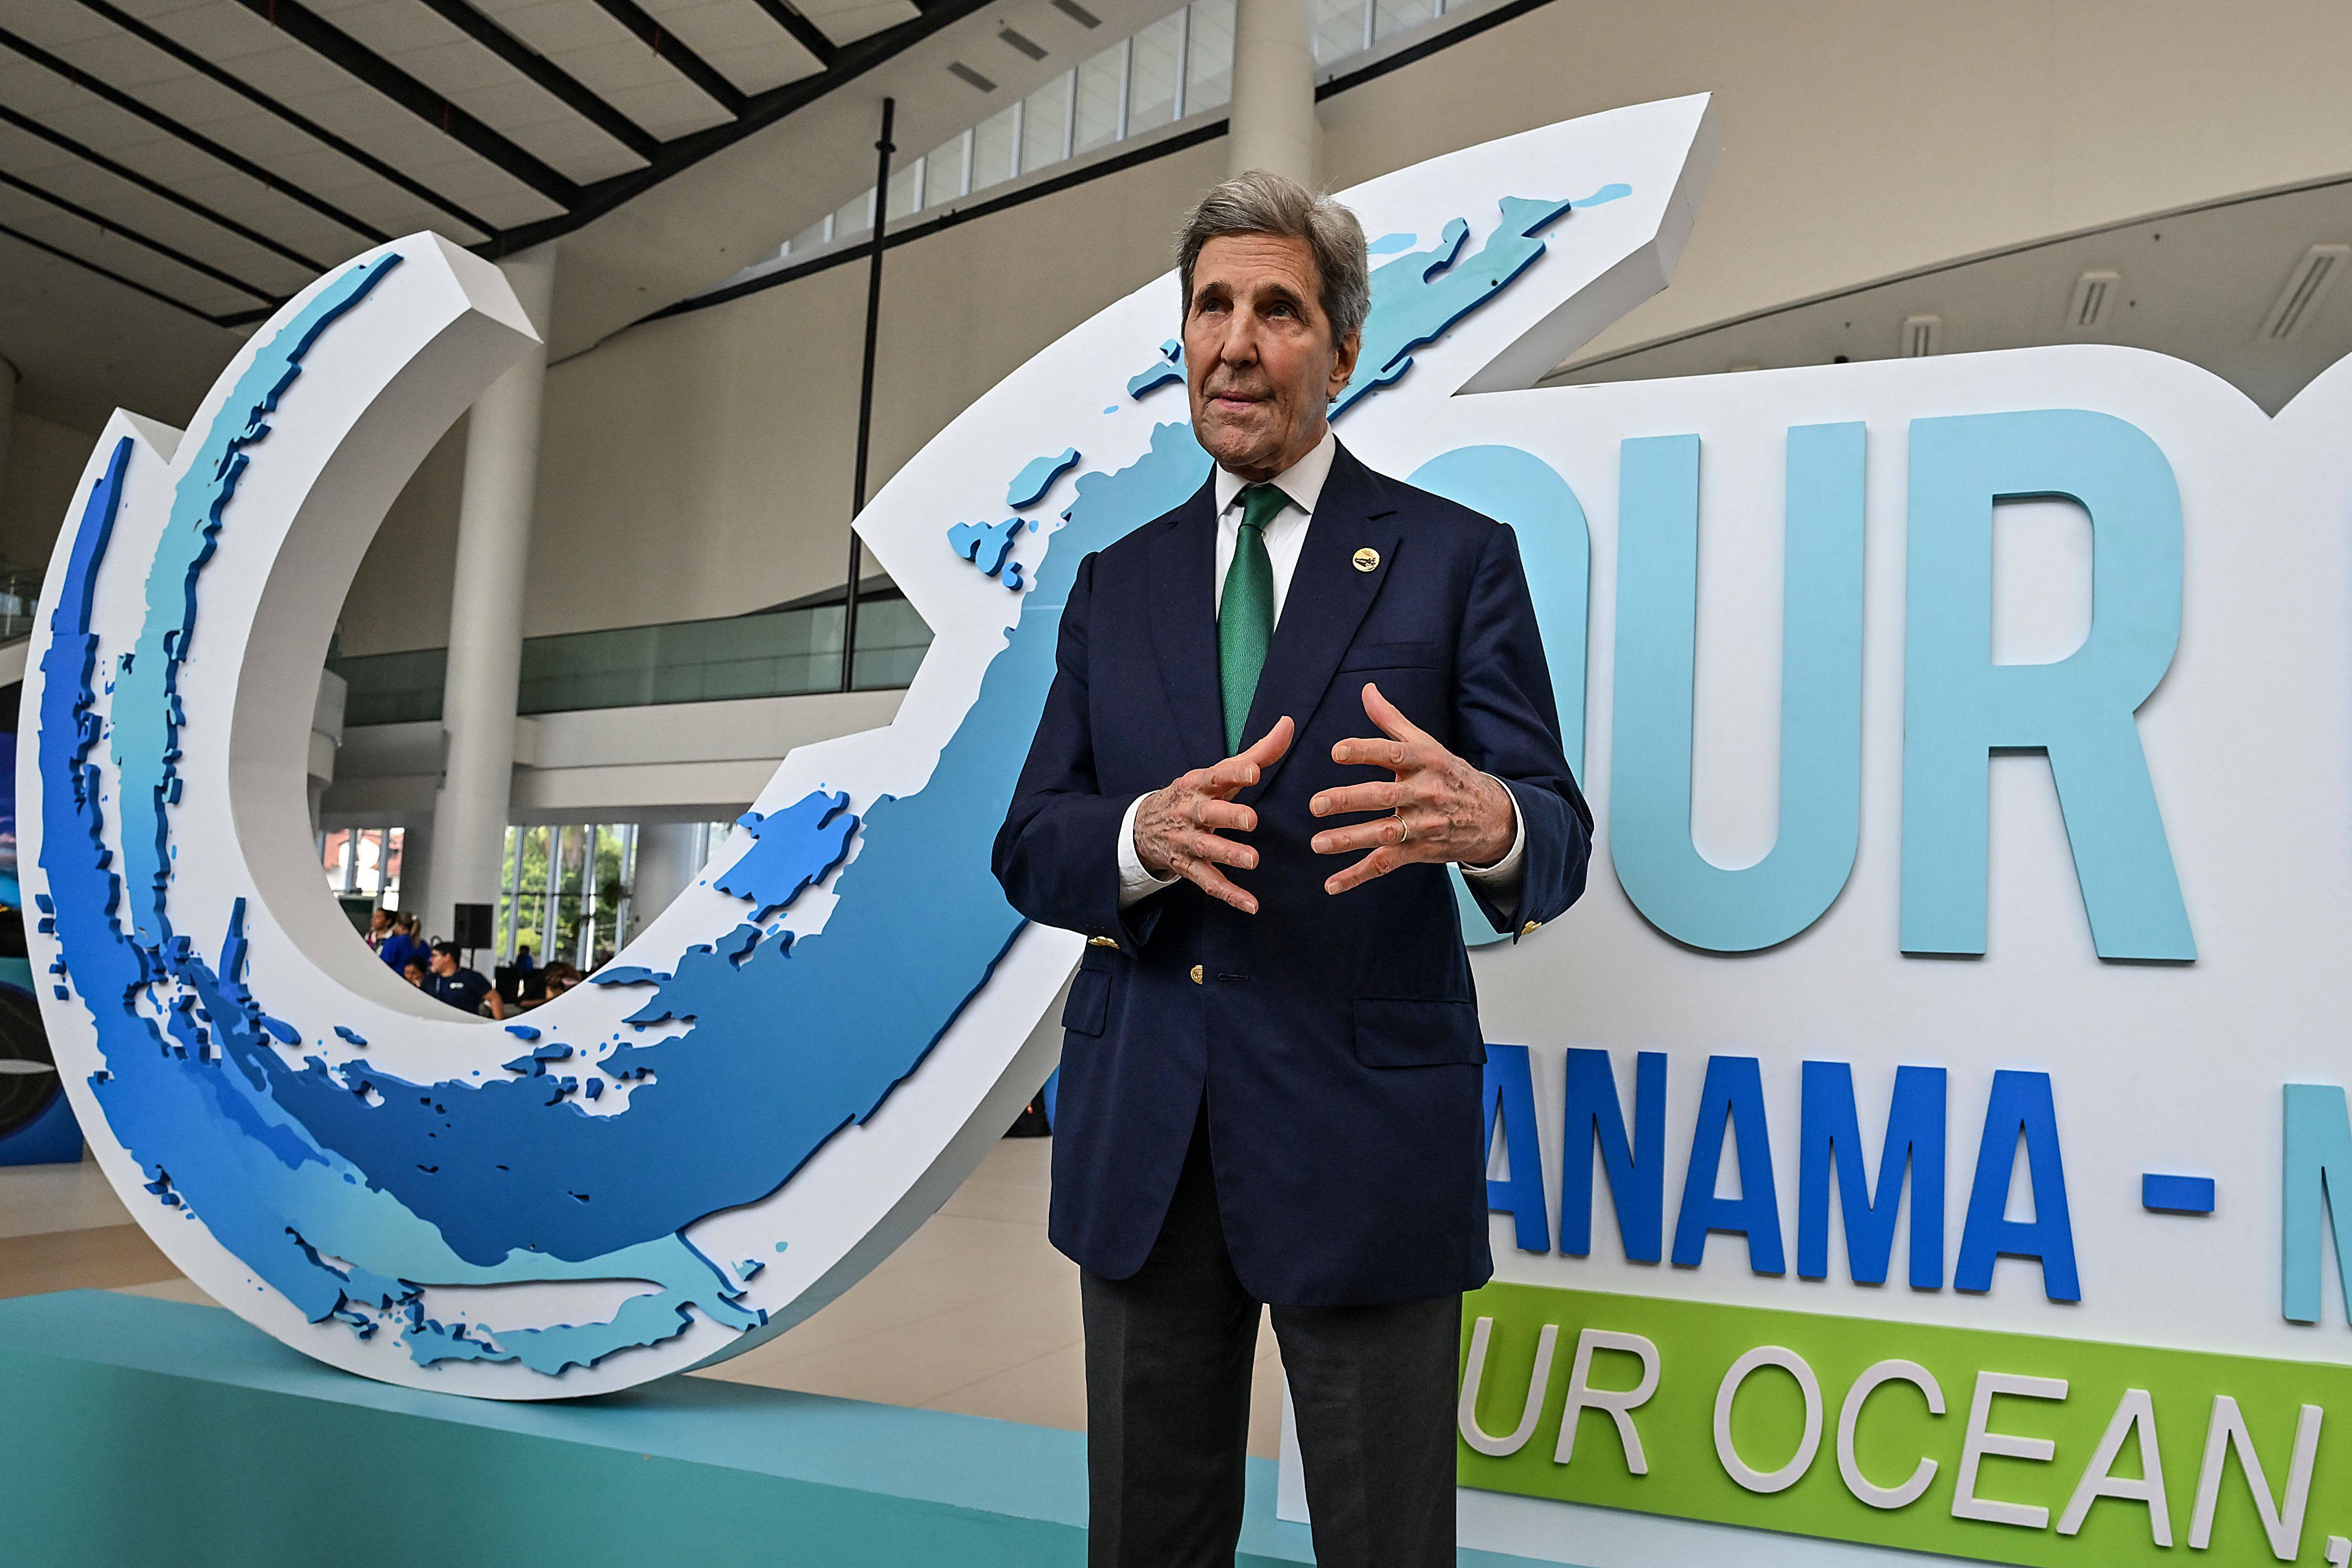 John Kerry, US special presidential envoy for climate, at the Panama Convention Centre in Panama City on Friday. Photo: AFP